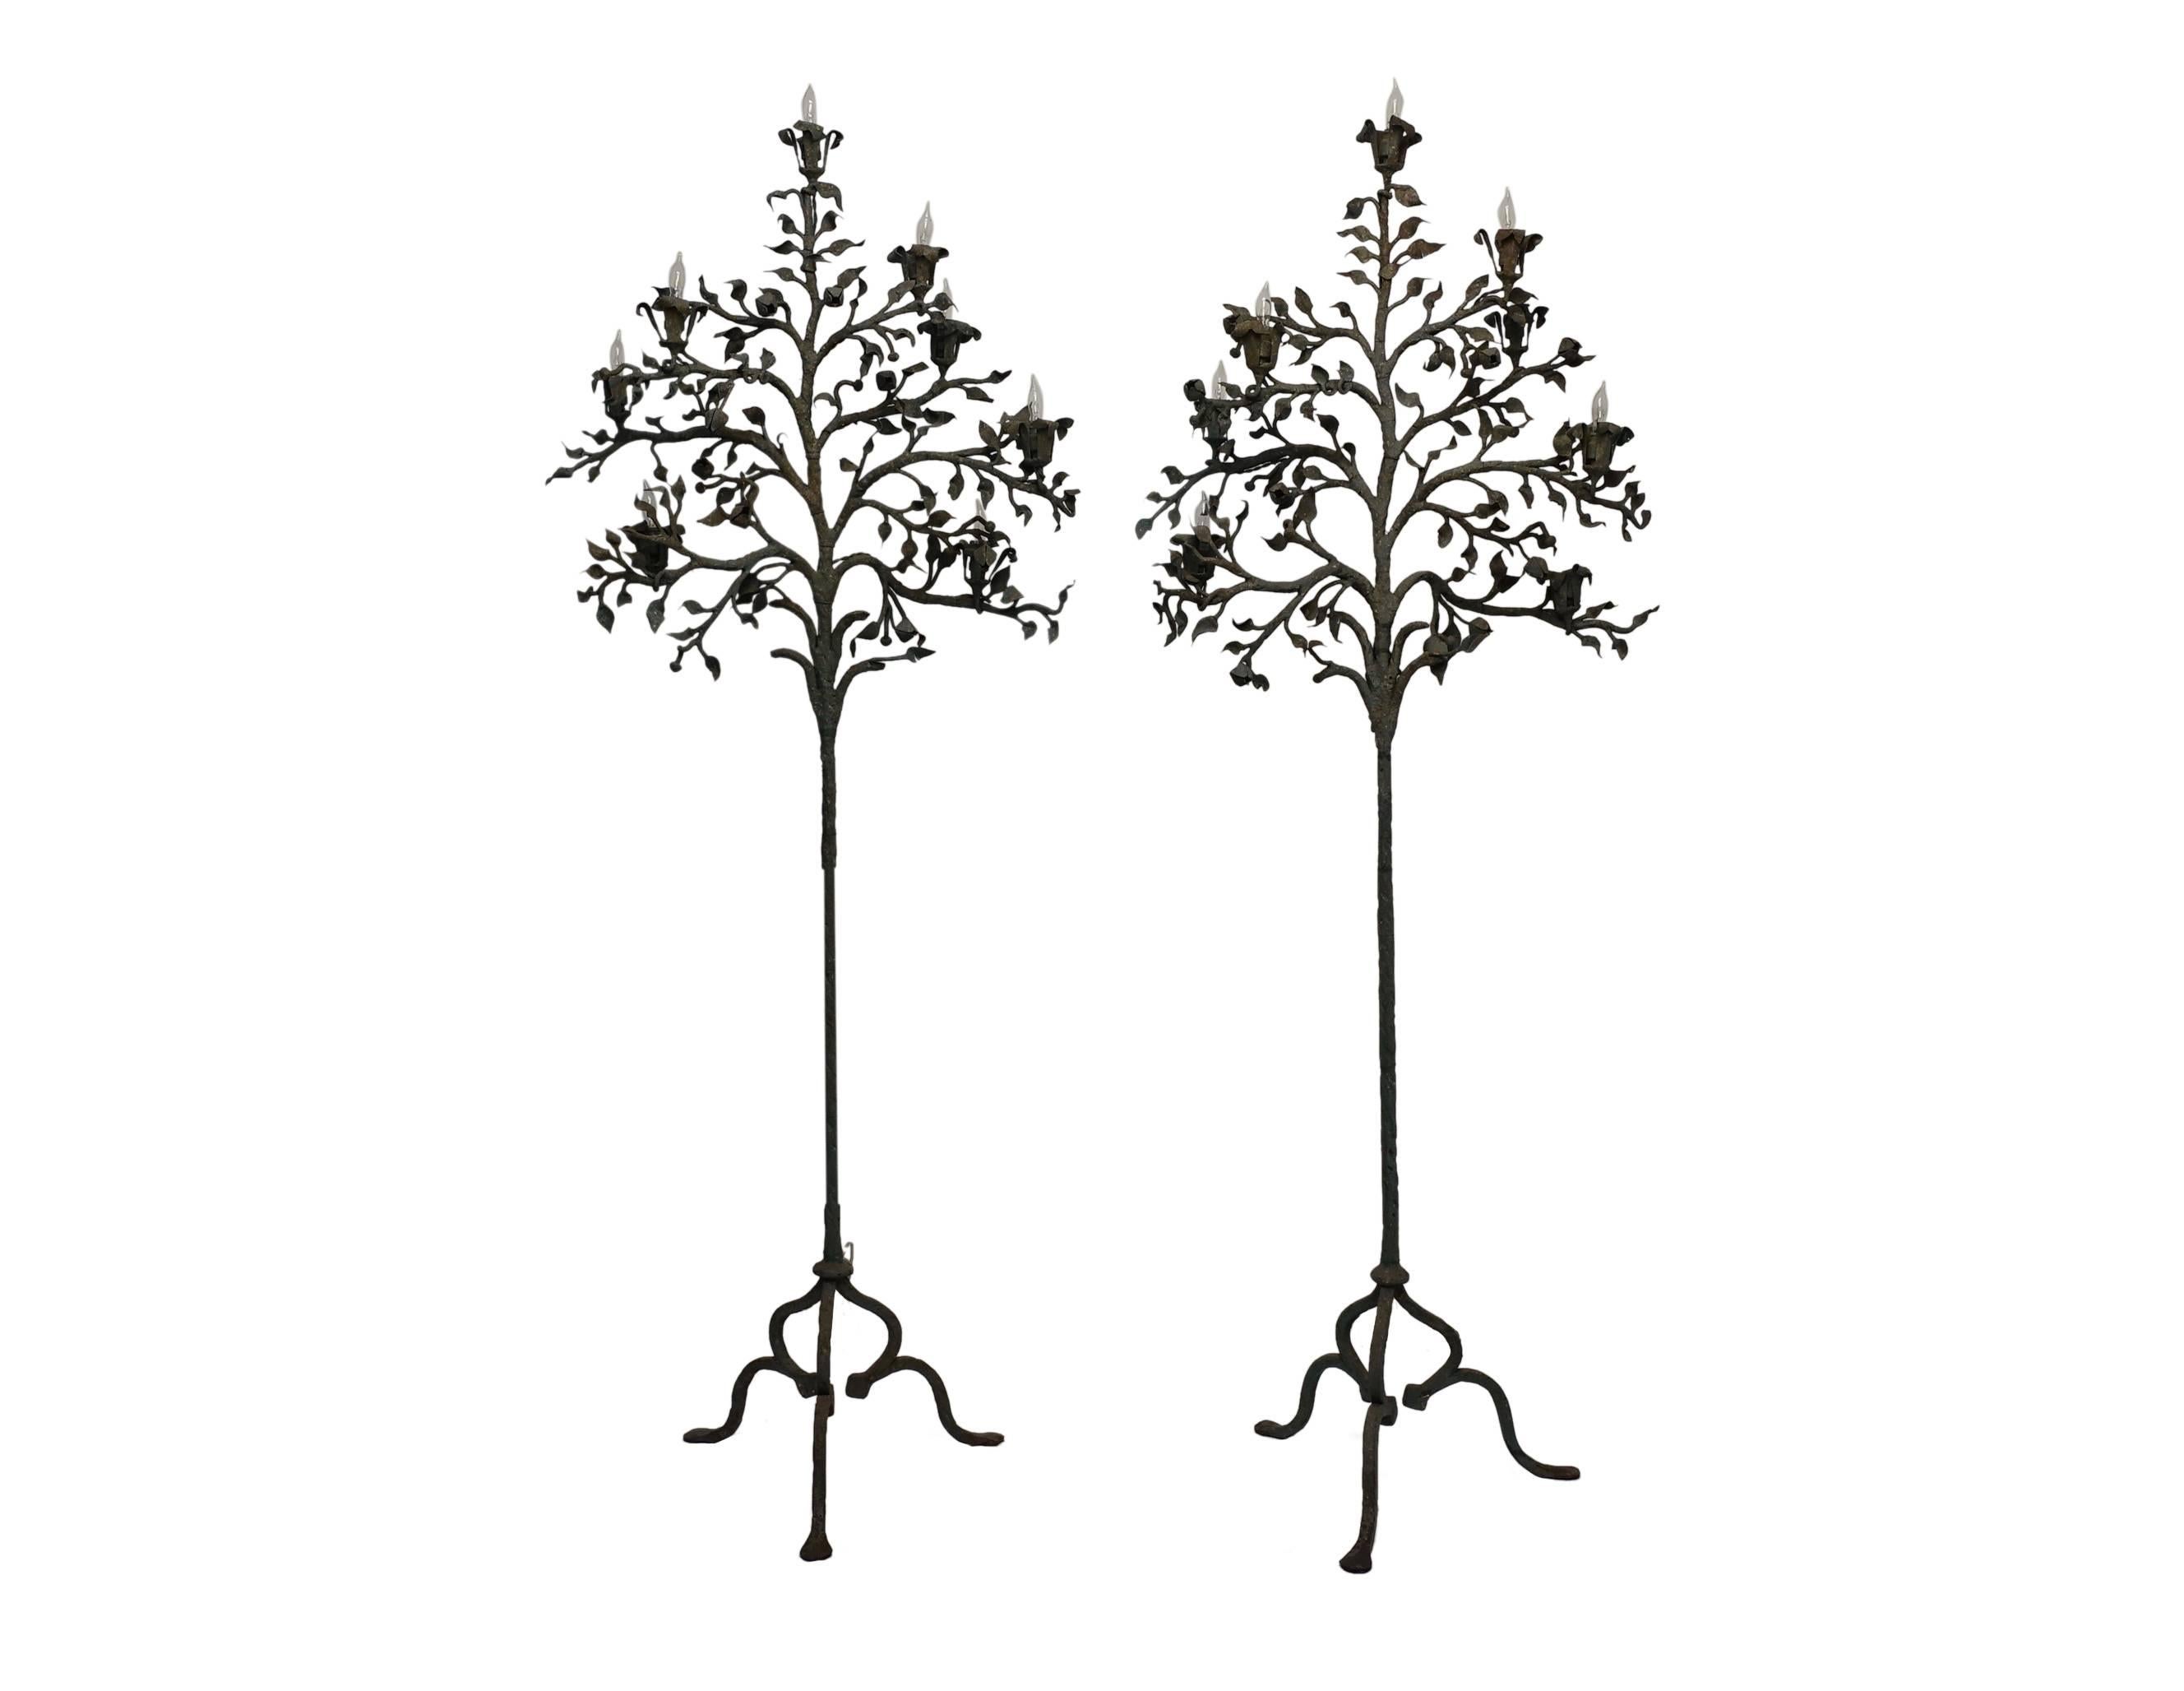 A pair of wrought iron tree shape eight light candle torchieres standing on try pad feet and painted a soft green color. Recently re-wired for lights, holding chandelier base bulbs, Italy, mid-19th century.